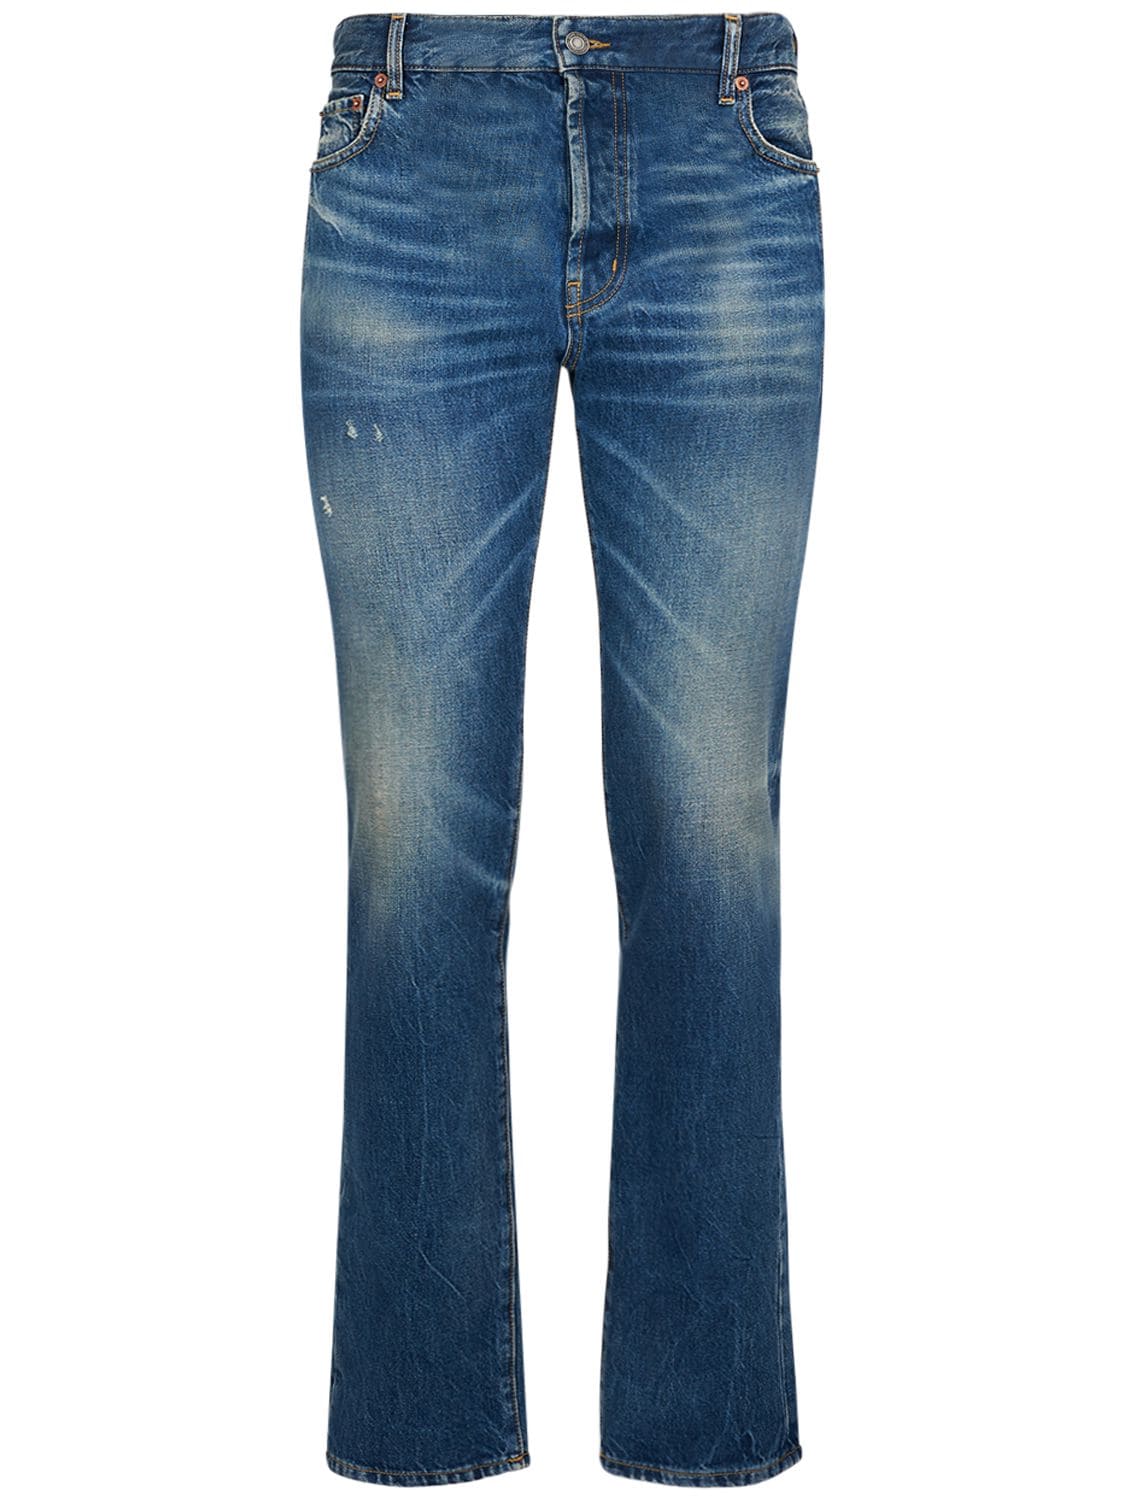 Image of Relaxed Straight Cotton Denim Jeans